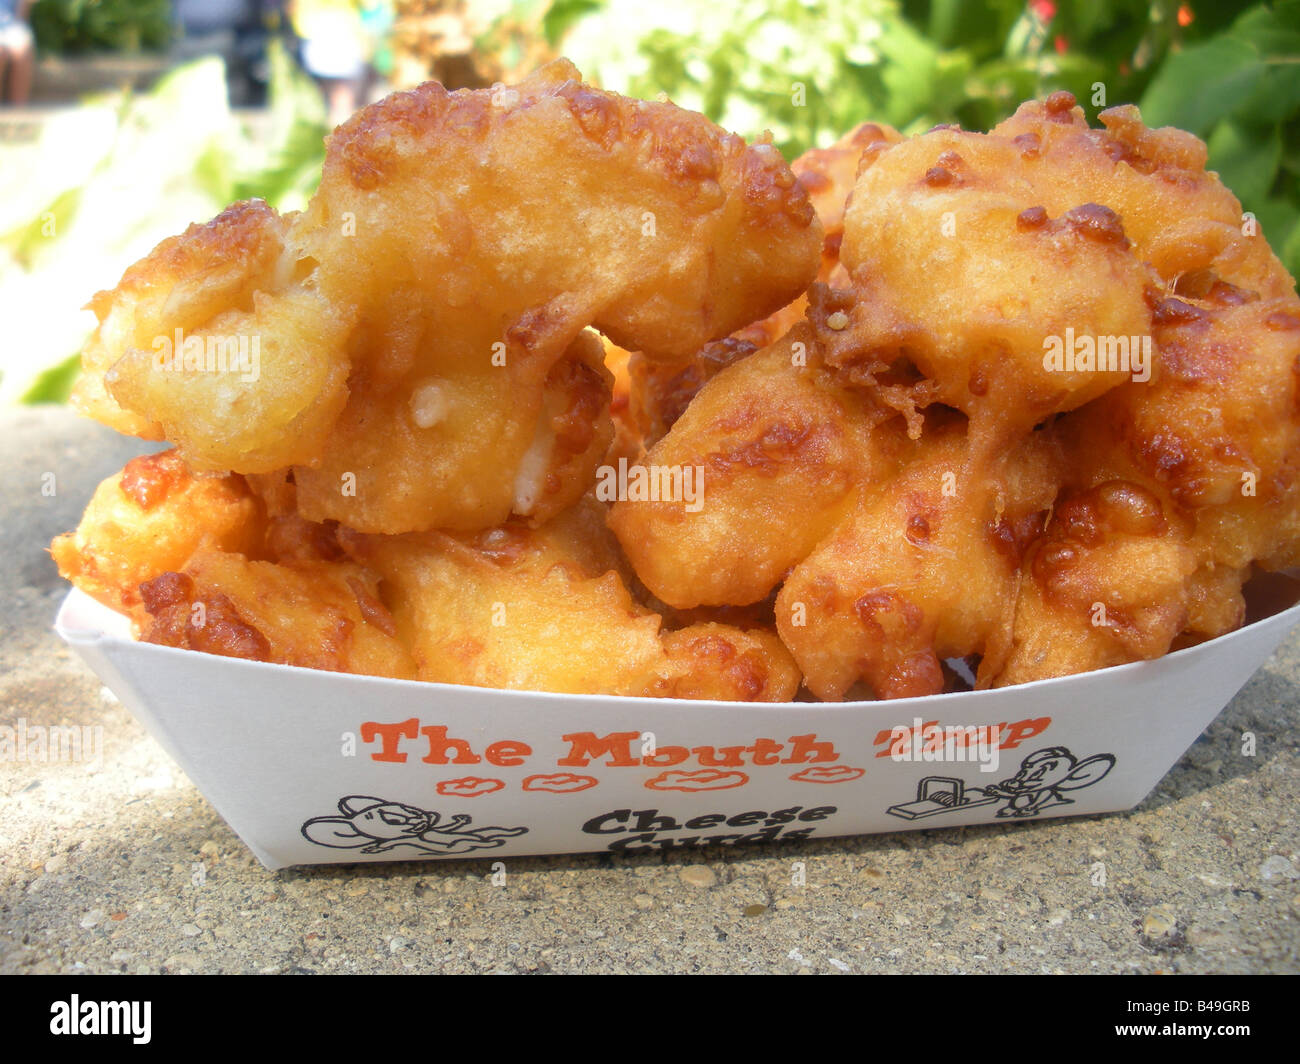 Deep fried cheese curds at the Minnesota State Fair Stock Photo